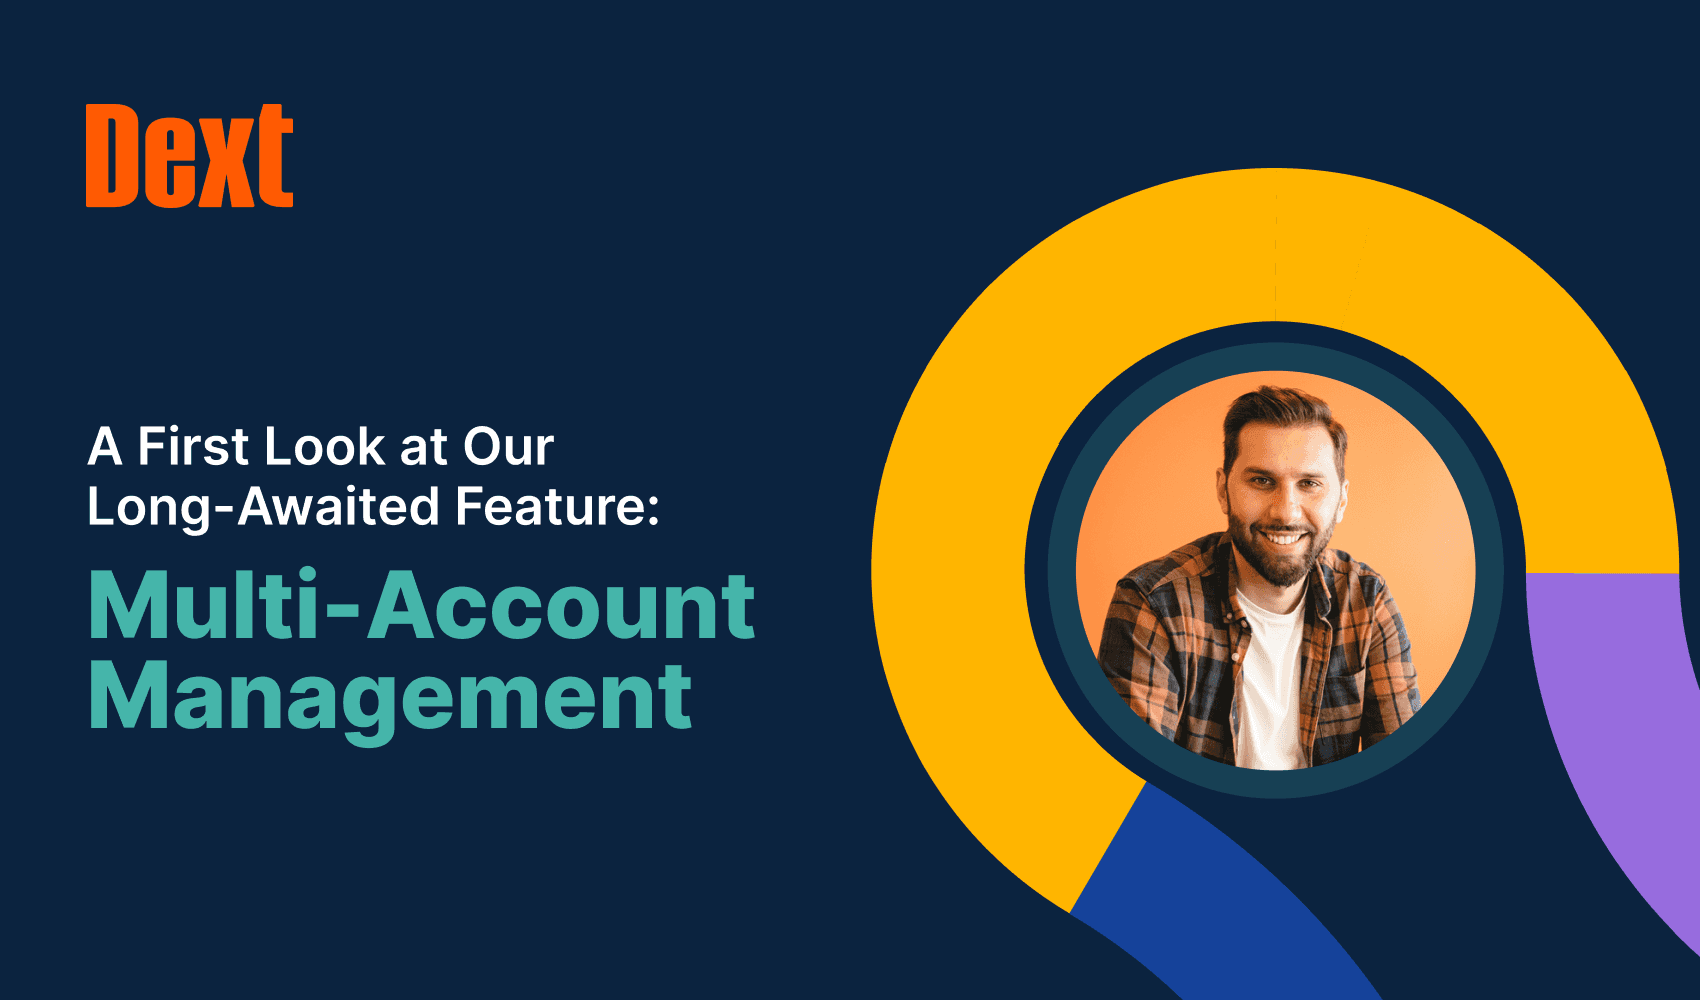 A First Look at Our Long-Awaited Feature: Multi-Account Management